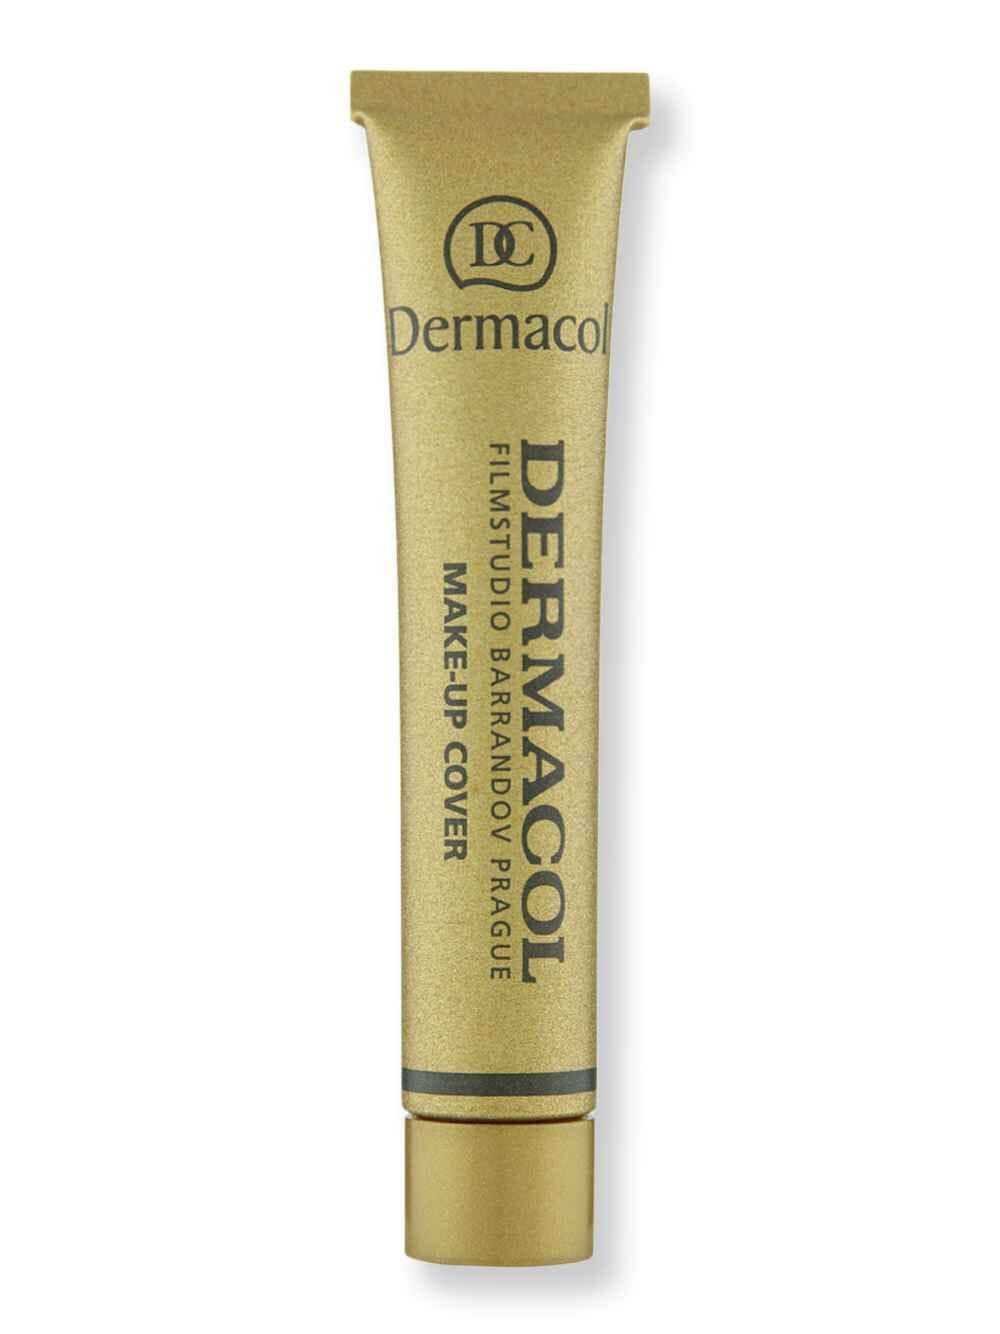 Dermacol Dermacol Make-up Cover 30 g210 Tinted Moisturizers & Foundations 